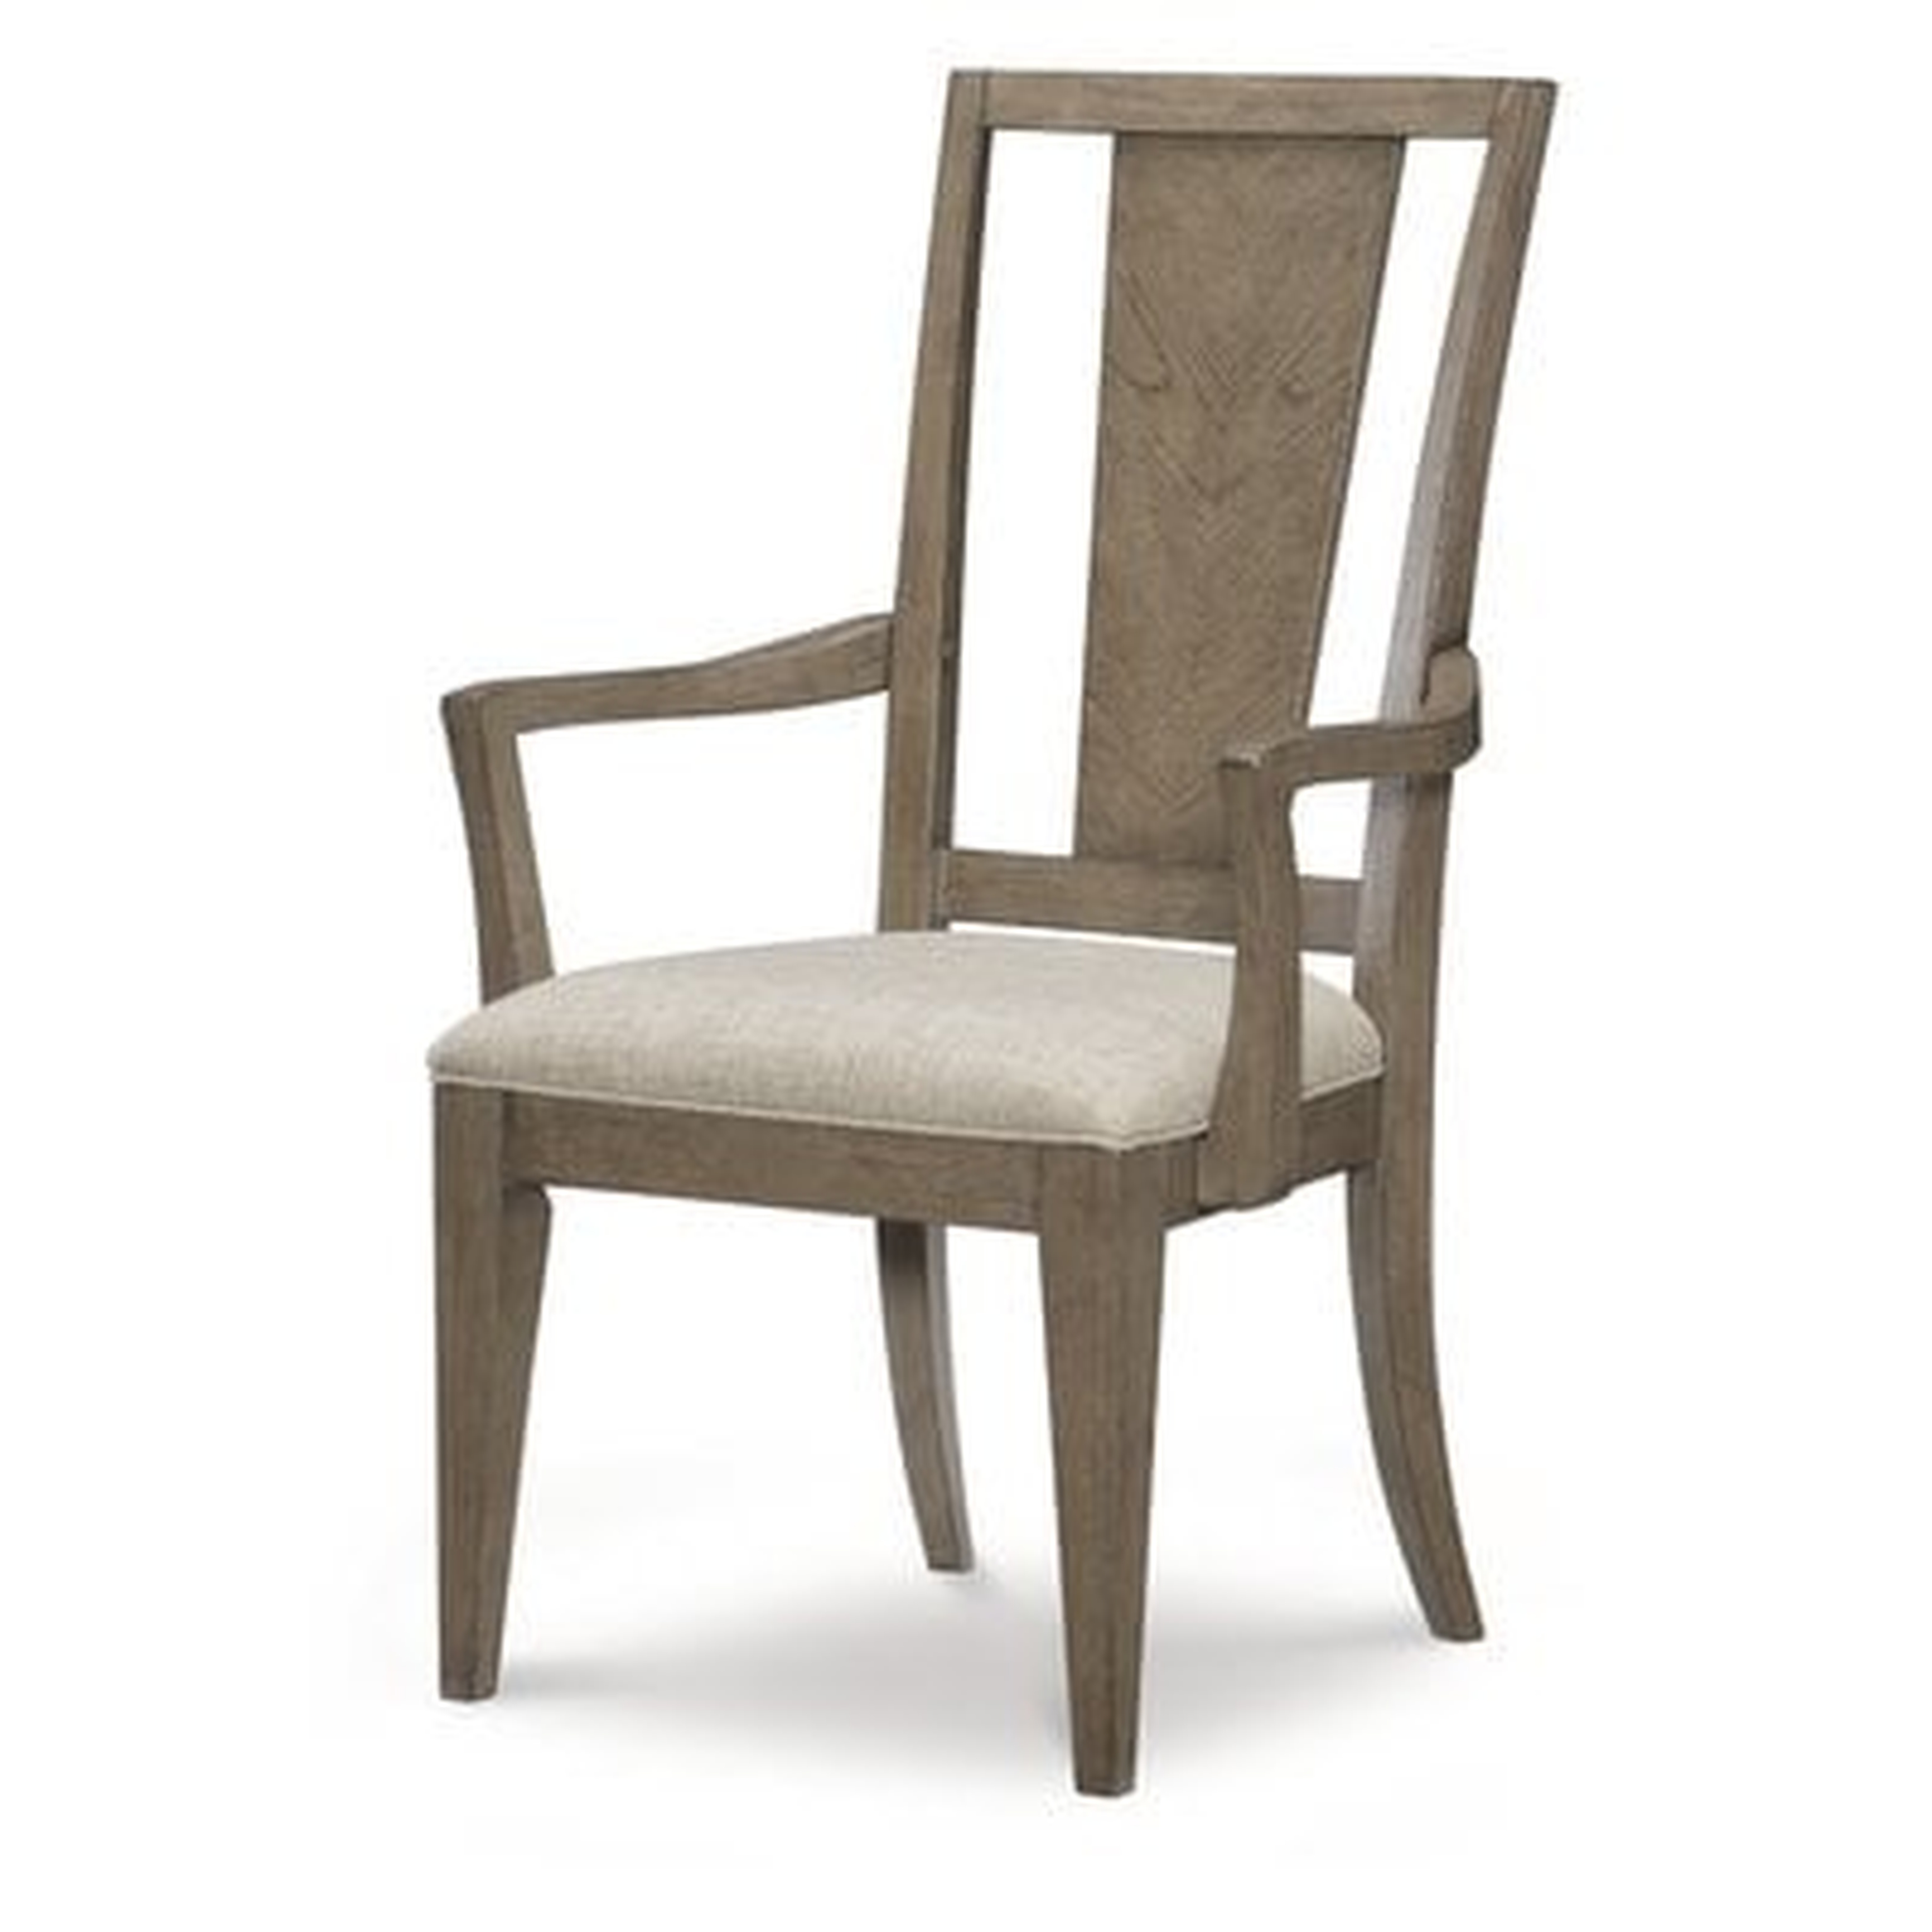 Whicker Upholstered Dining Chair (Set of 2) - Wayfair